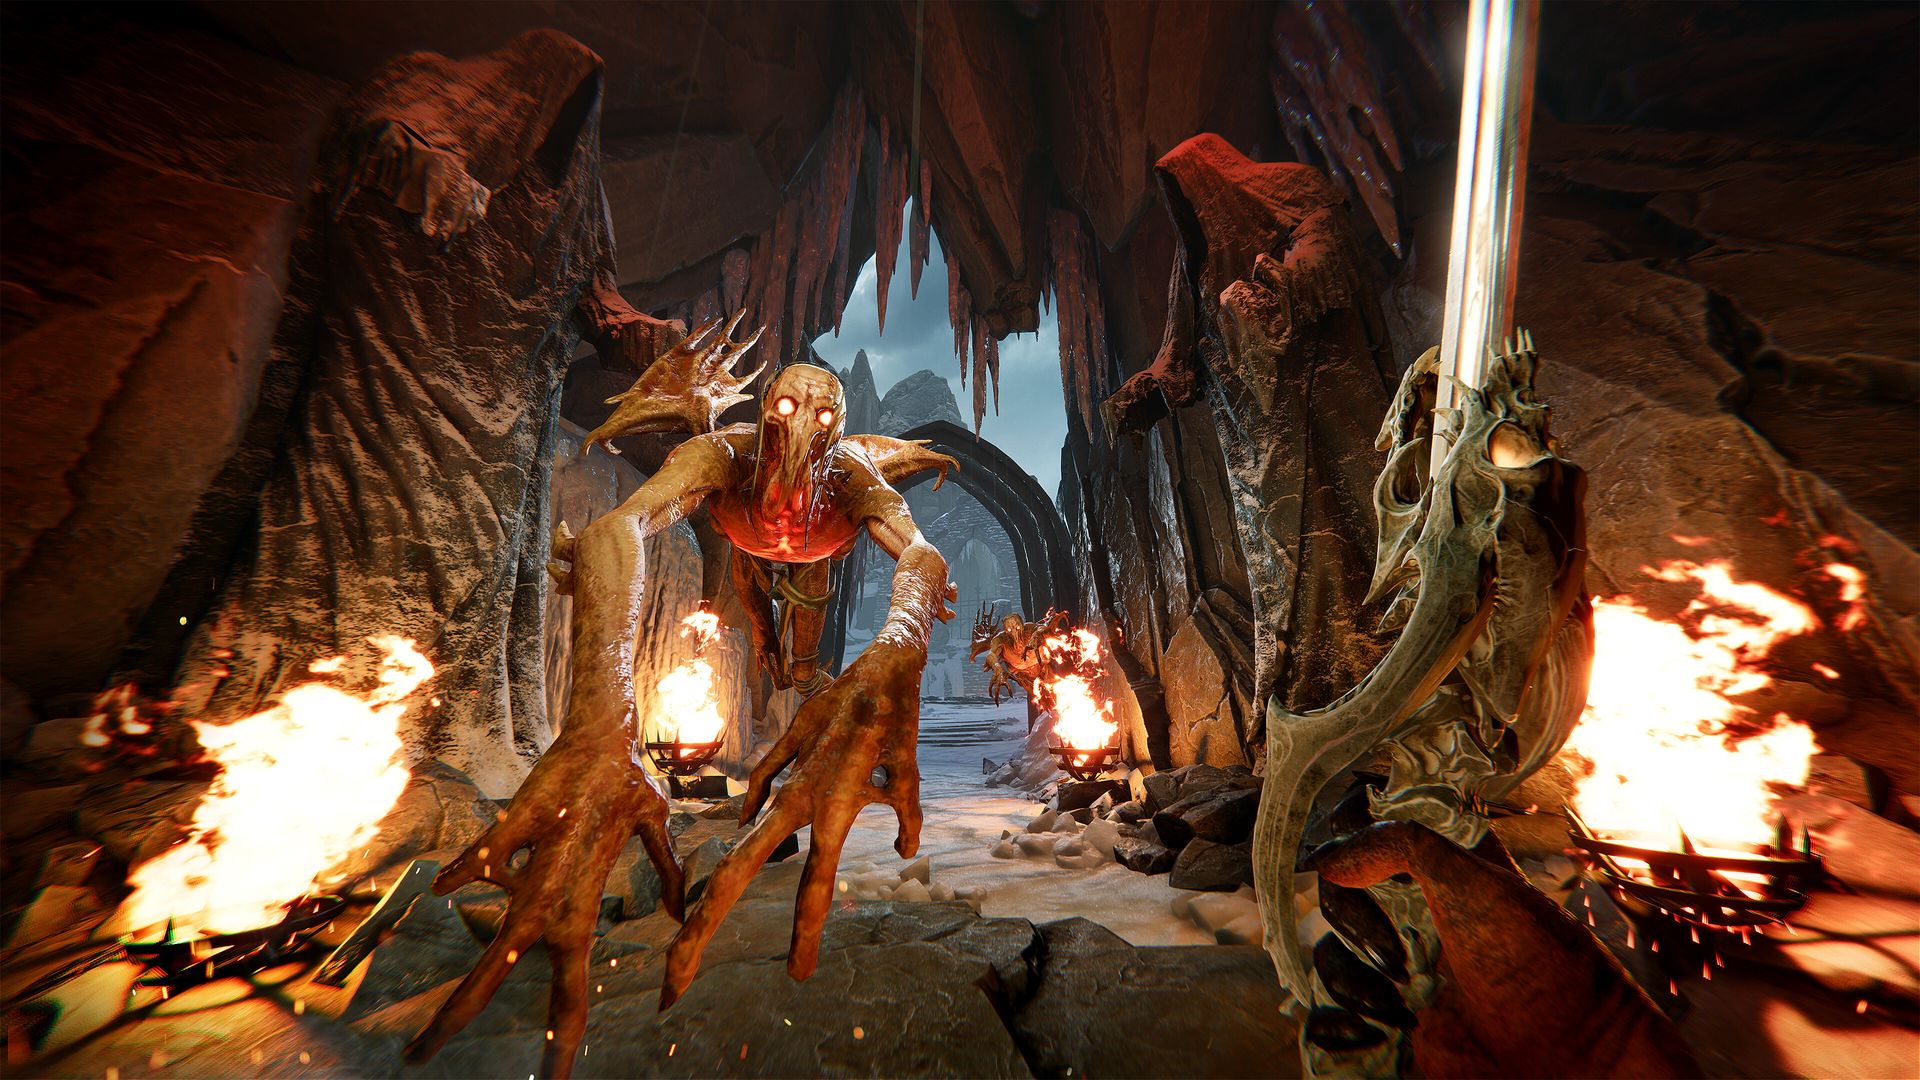 Video game screenshot showing a demon fly toward the player, whose character is holding a sword